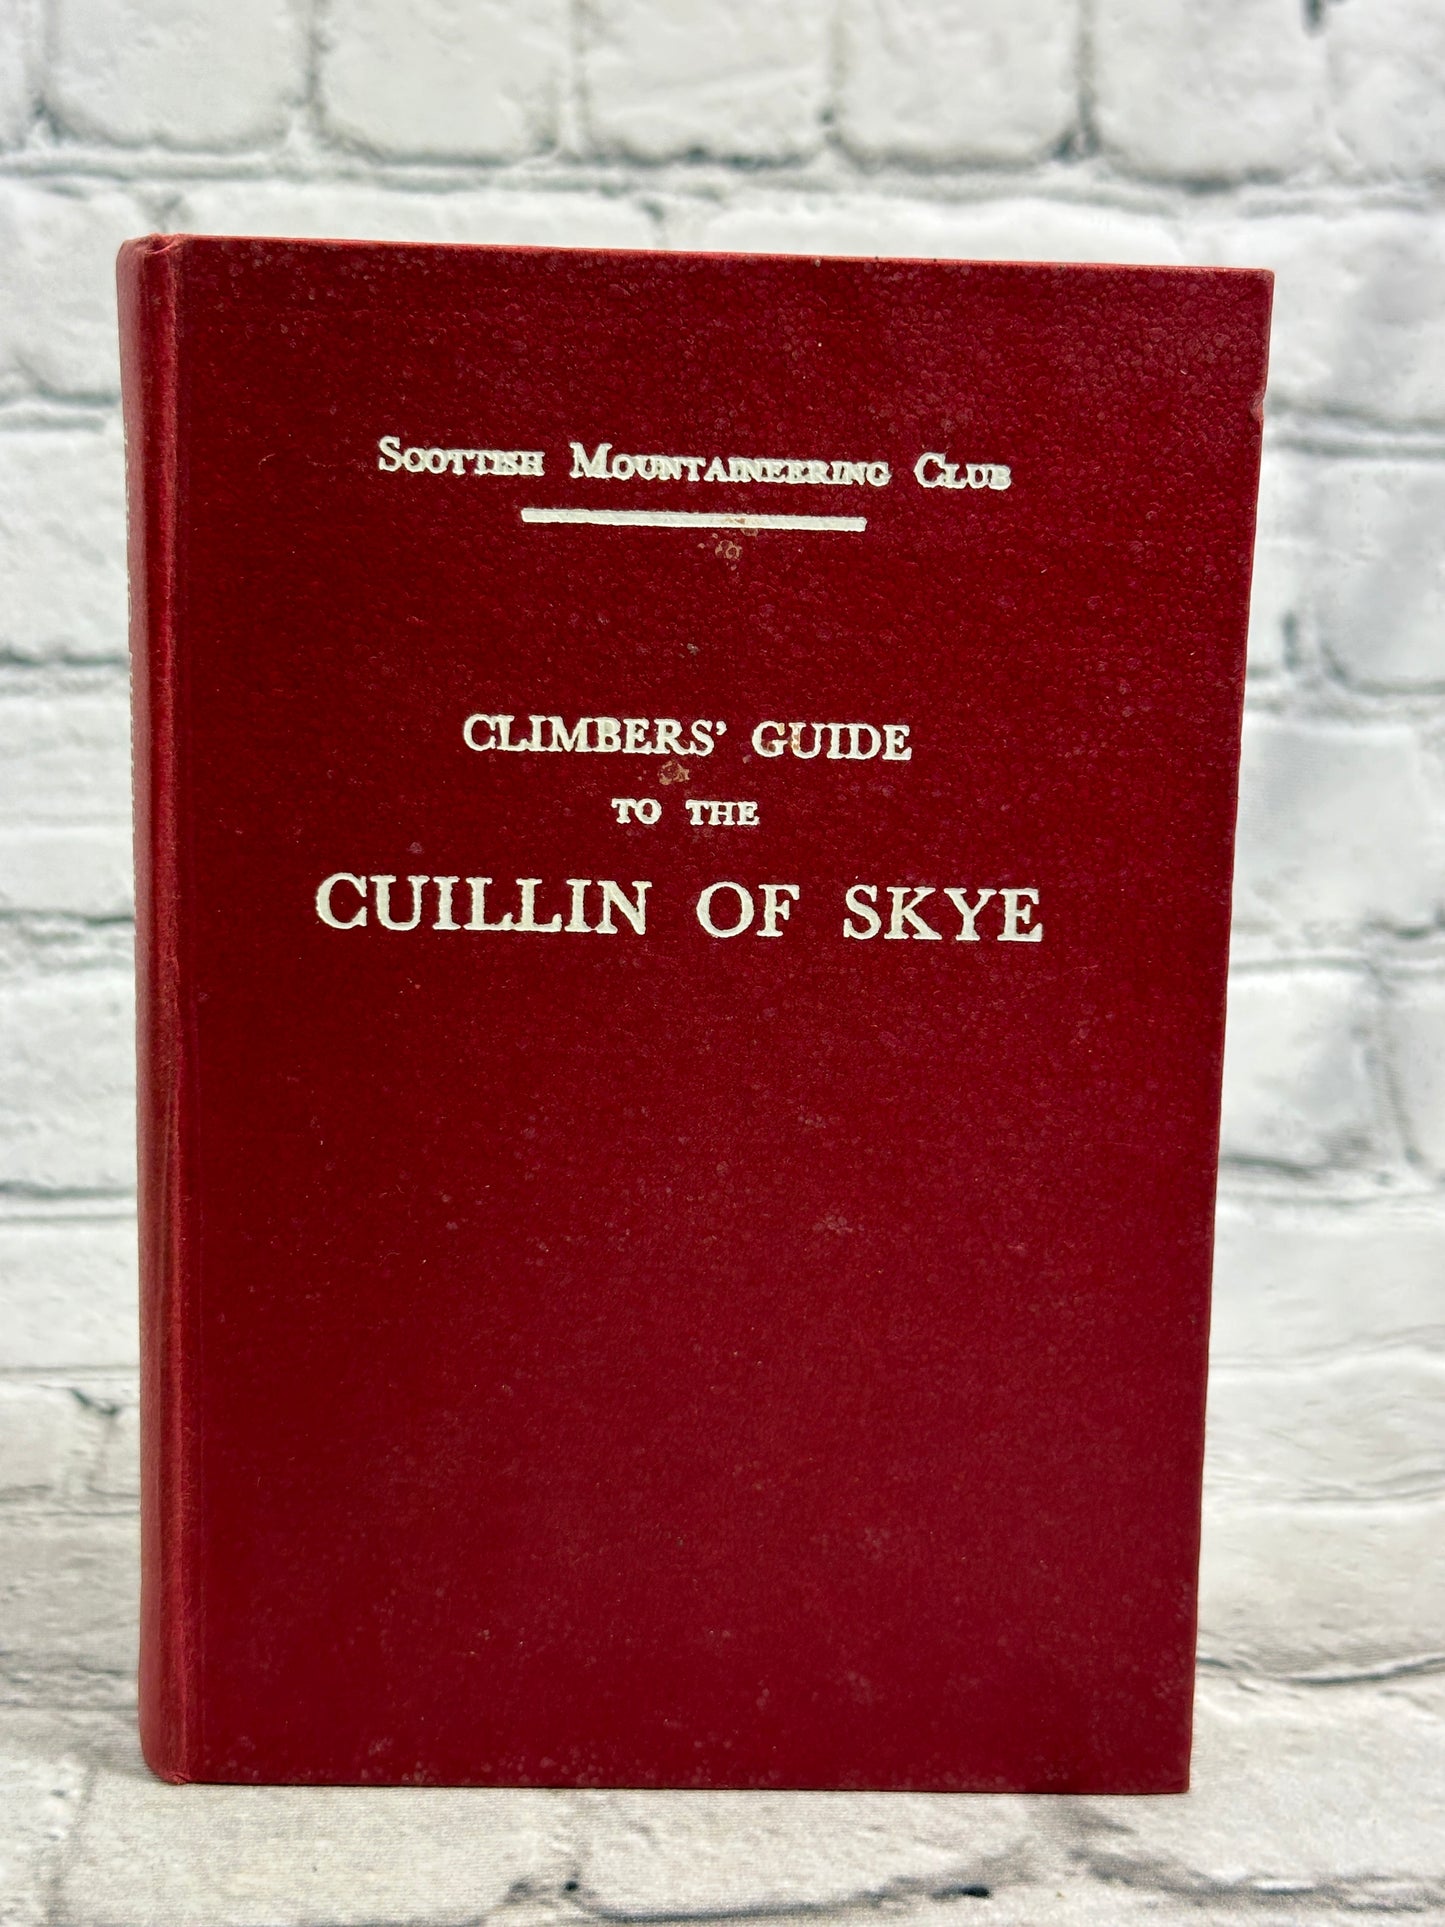 Climbers' Guide to the Cuillin of Skye by William MacKenzie [1965]